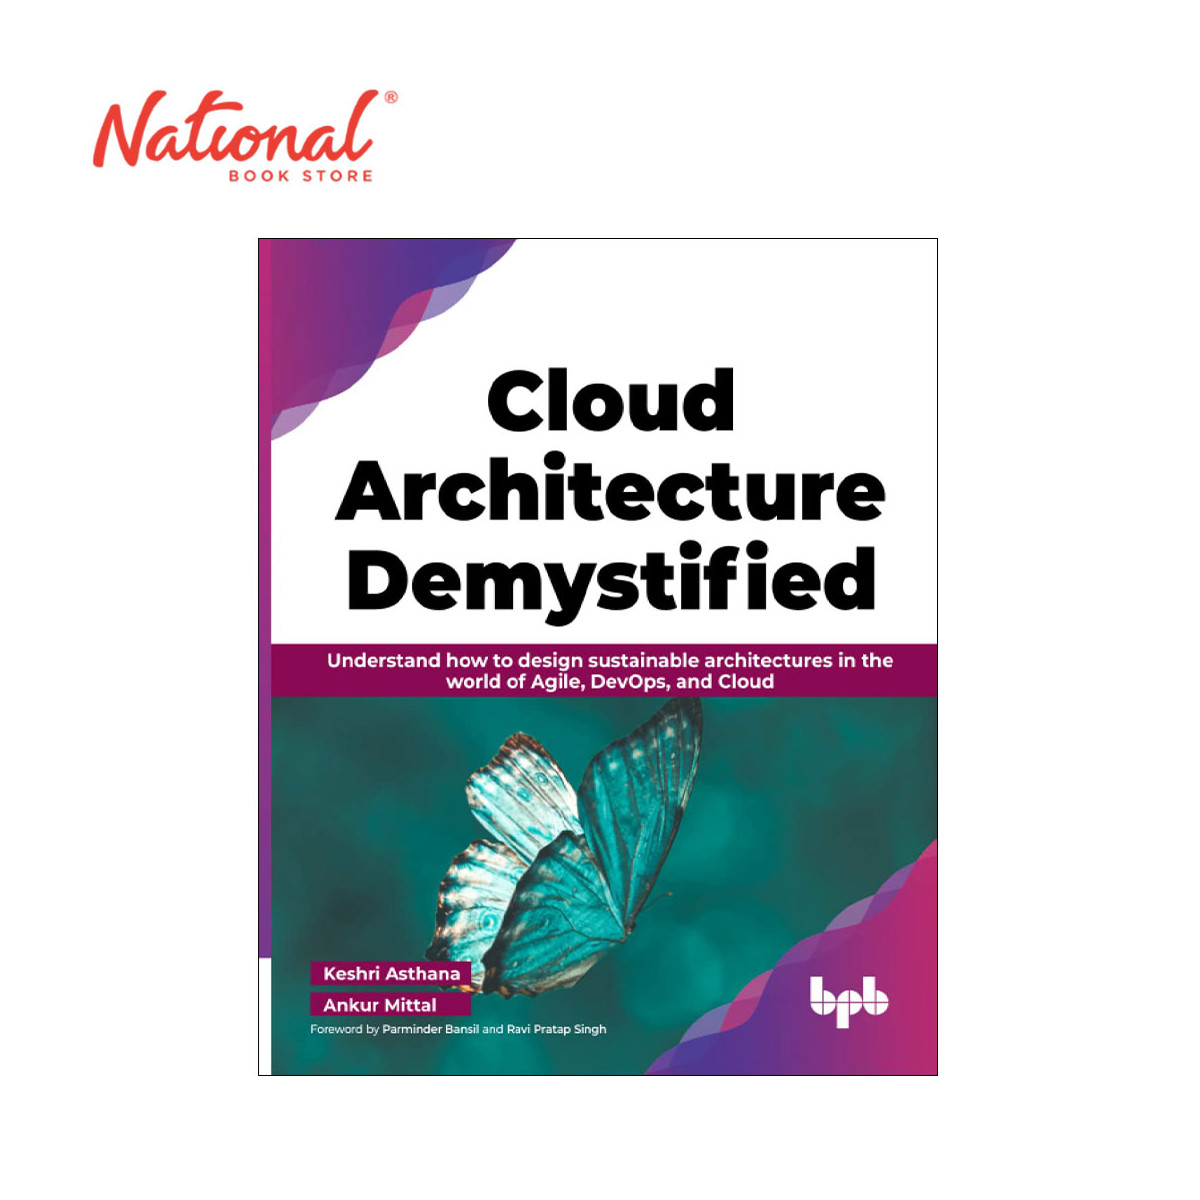 Cloud Architecture Demystified by Keshri Asthana - Trade Paperback - College Books